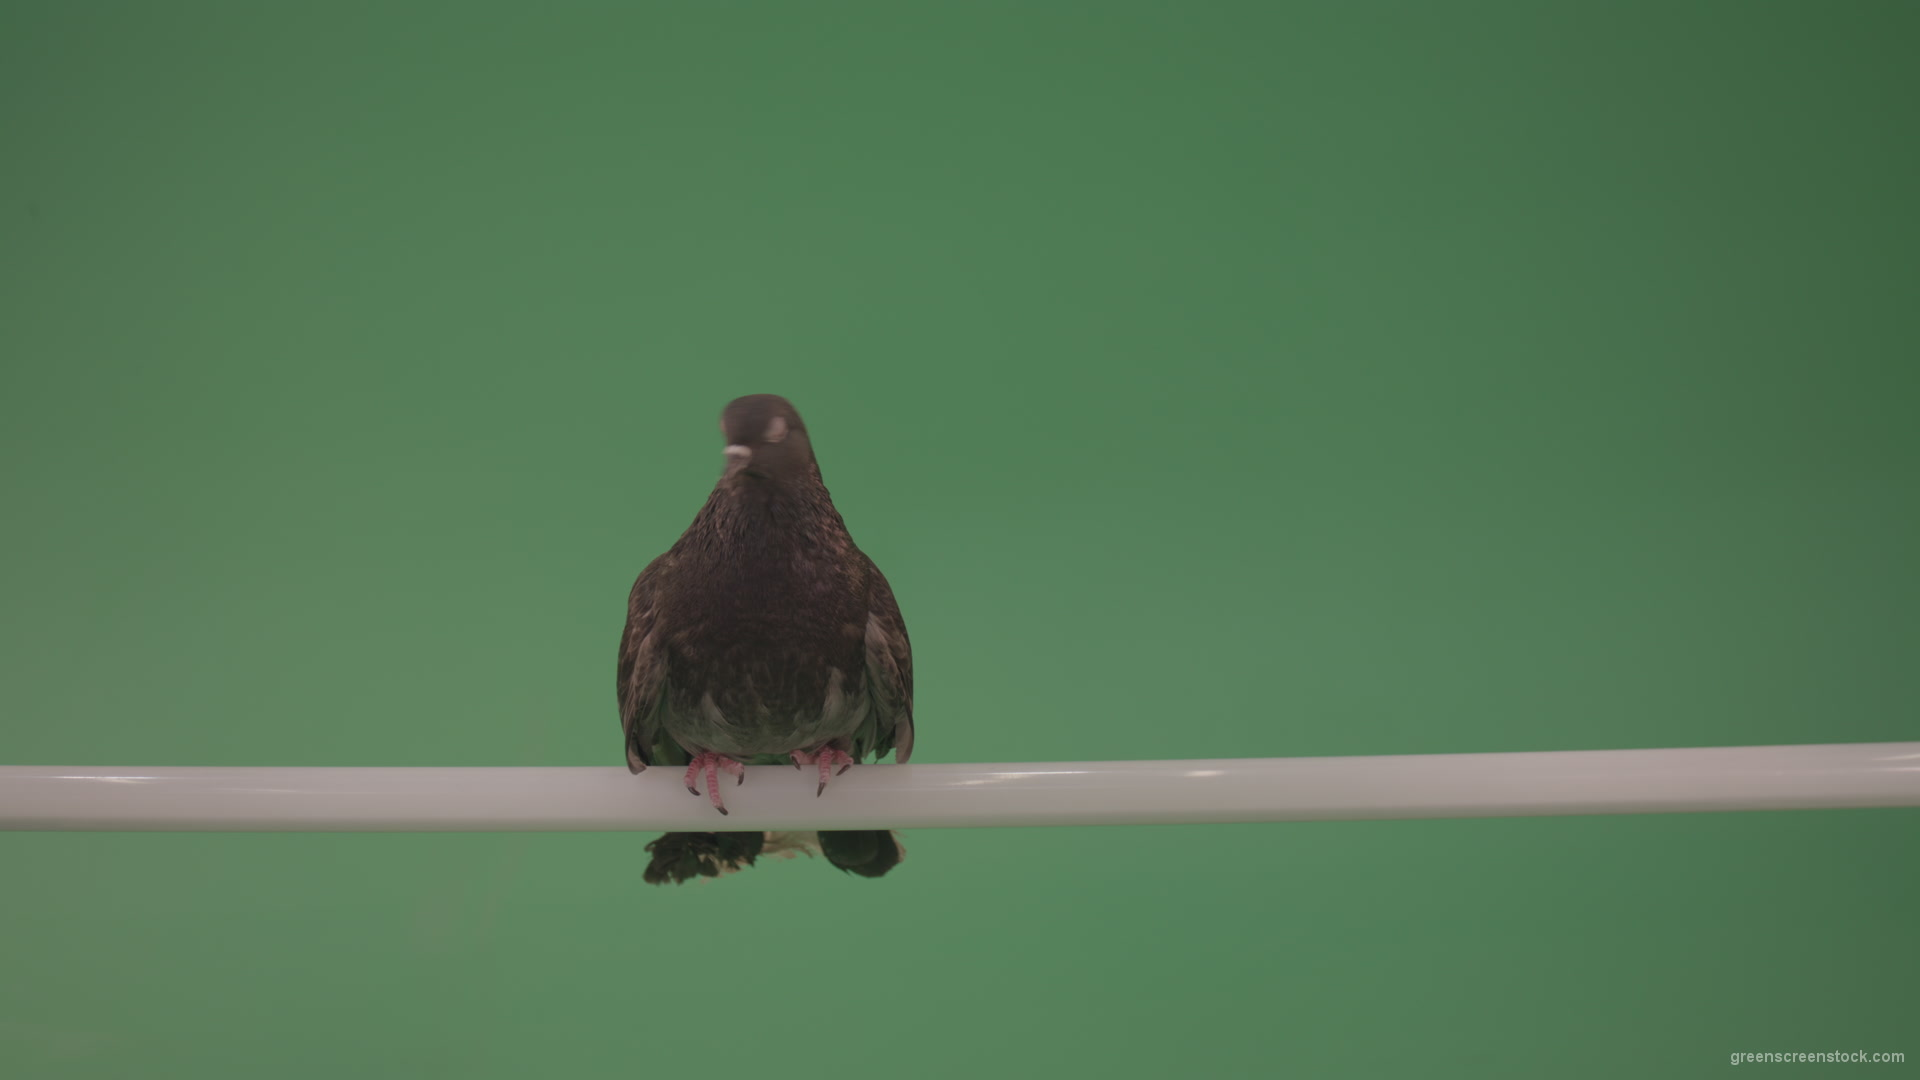 Dove-sitting-on-a-branch-in-the-city-isolated-in-green-screen-studio_006 Green Screen Stock